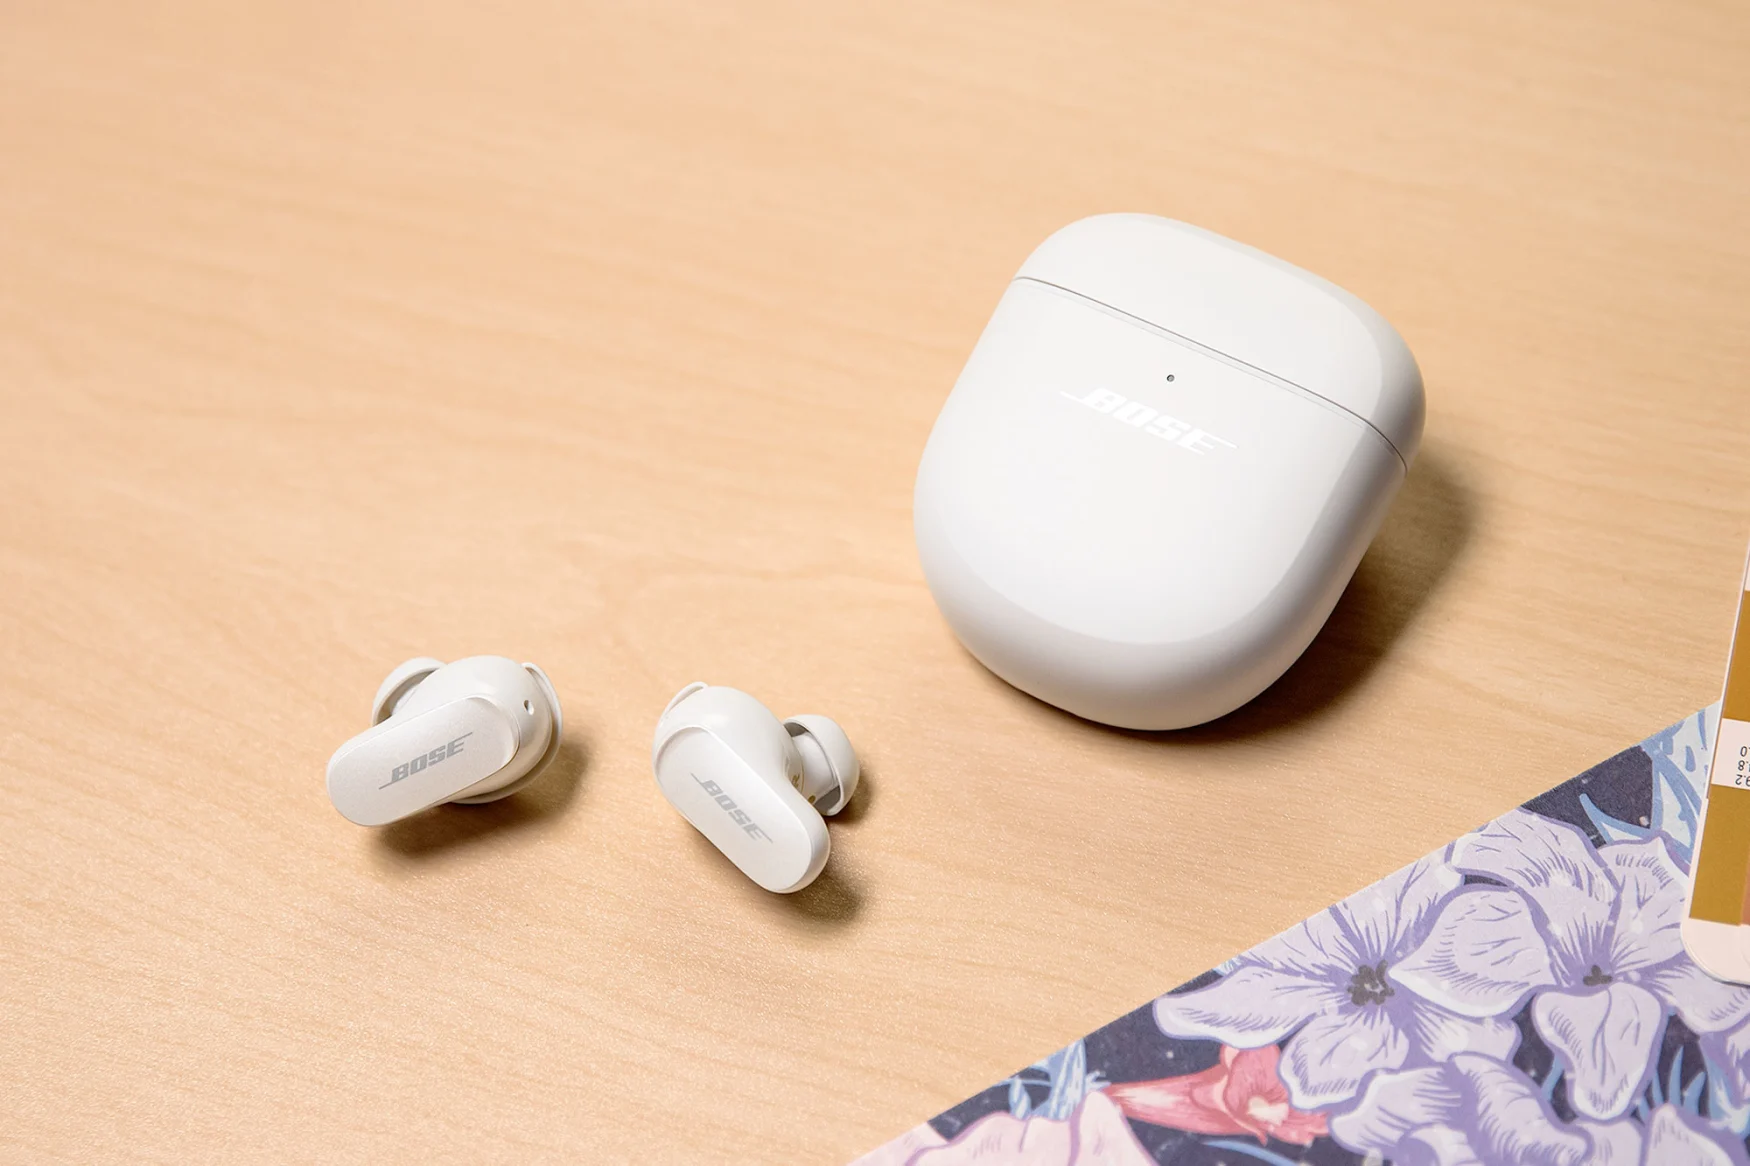 Bose's QuietComfort Earbuds II automatically customize sound and